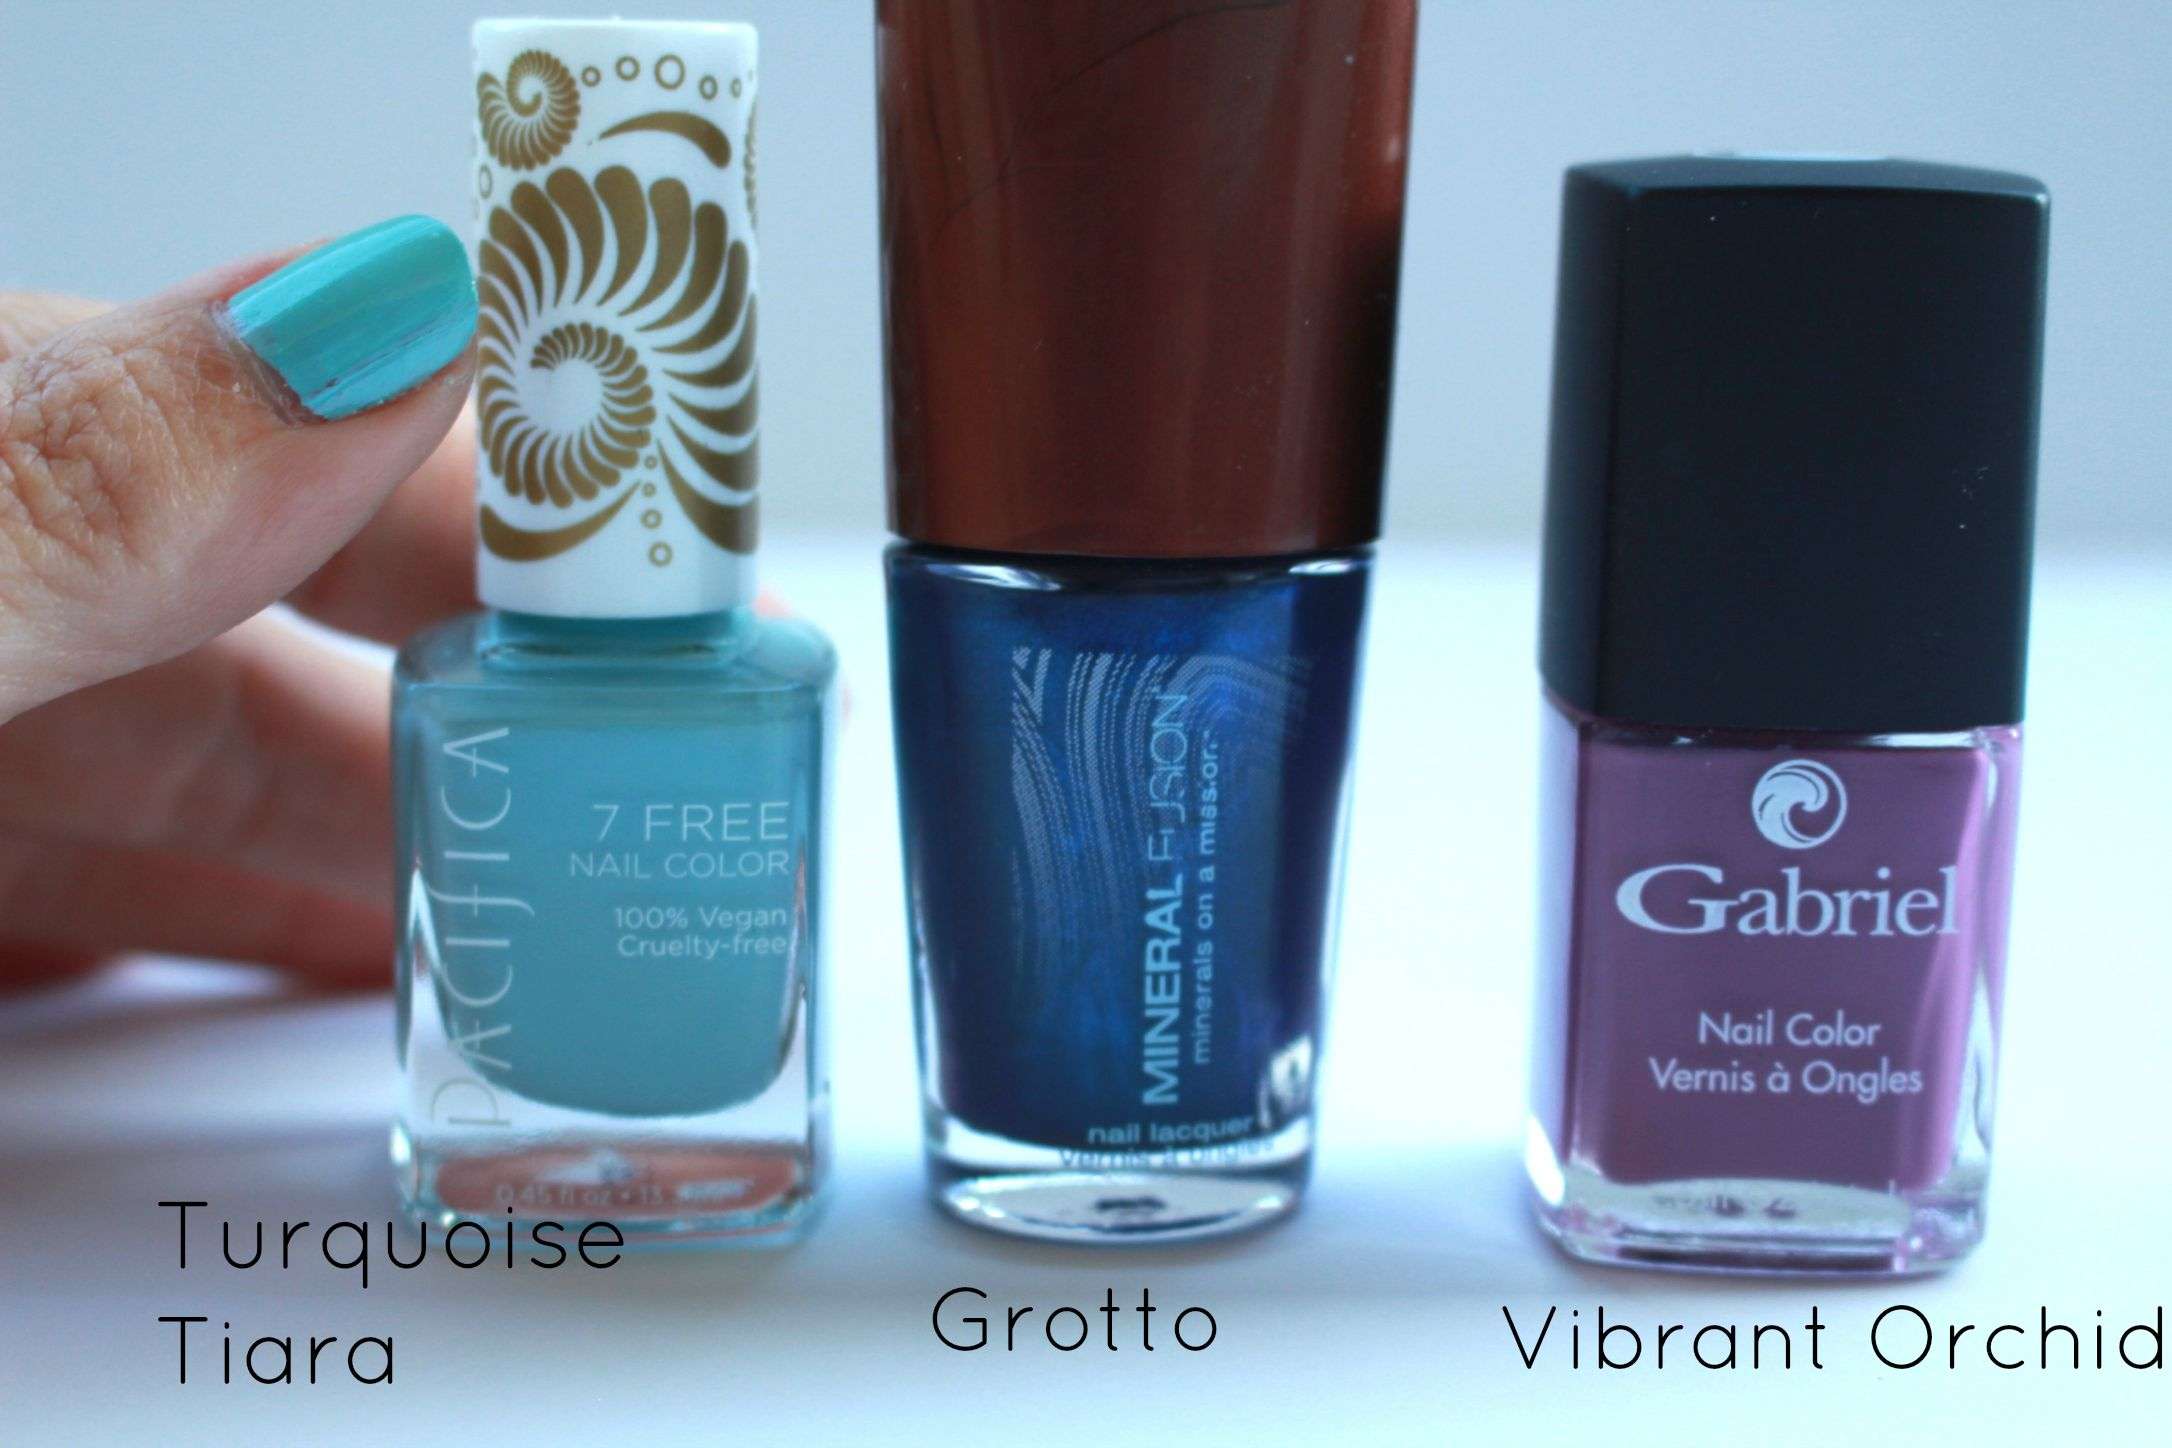 3 Non toxic nail polish brands to try now.